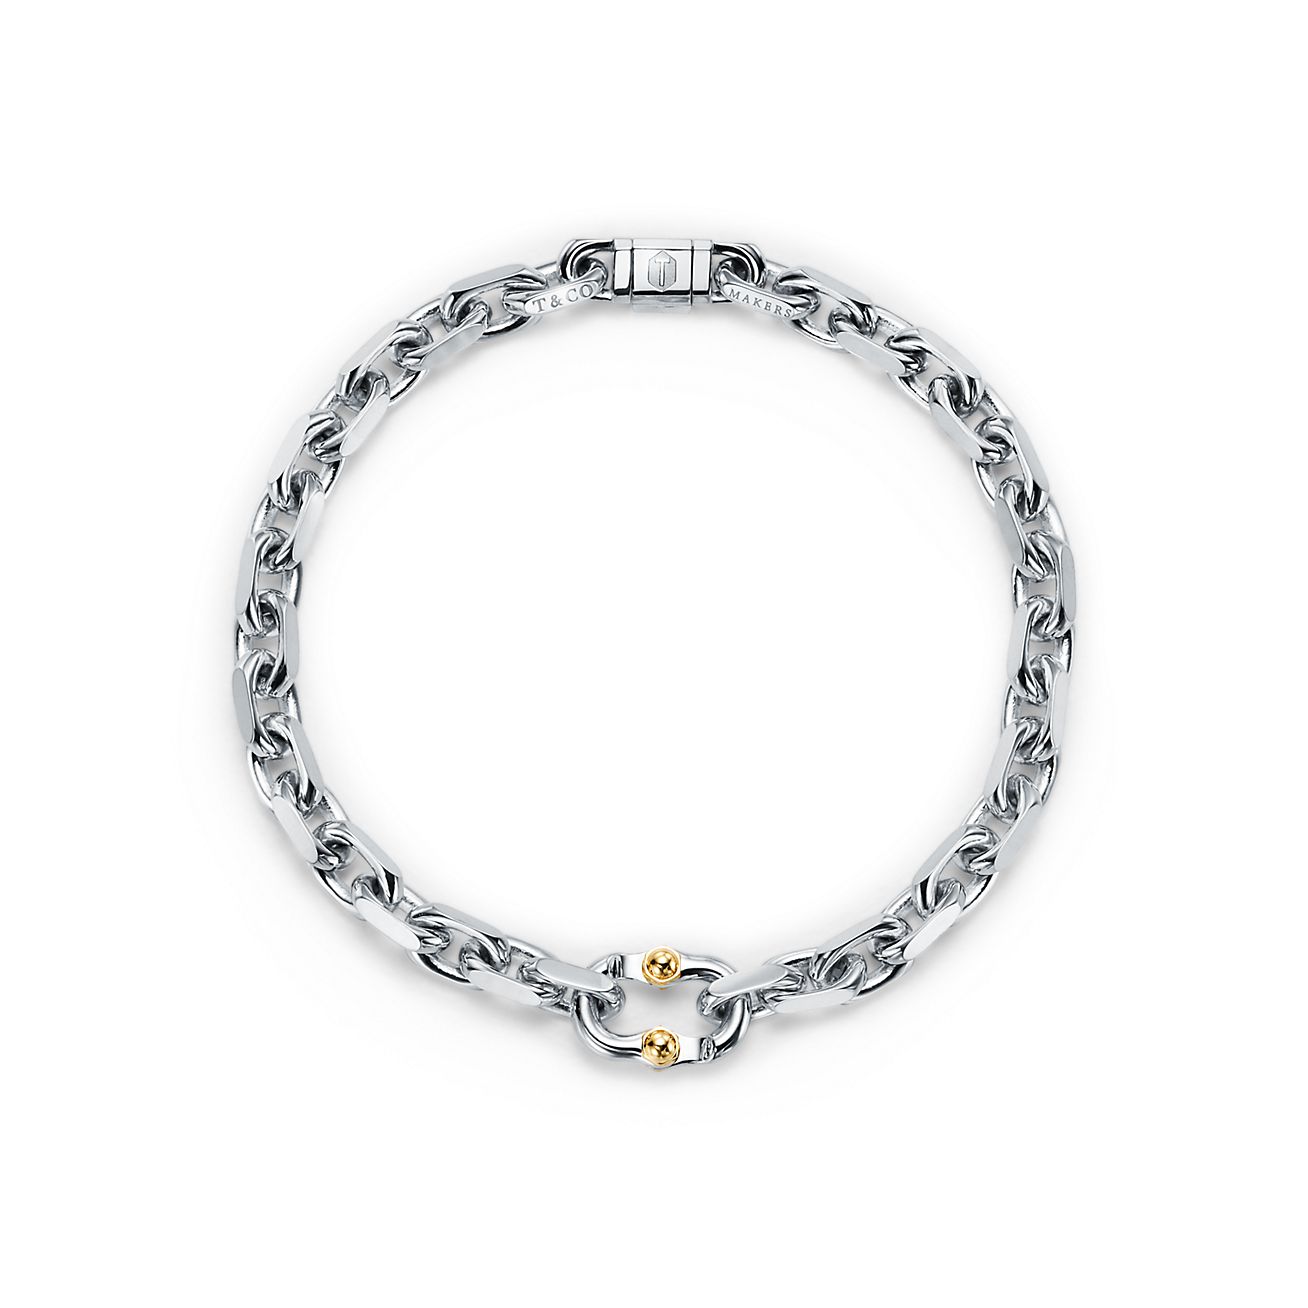 Tiffany 1837® Makers Narrow Chain Bracelet in Sterling Silver and 18k Gold